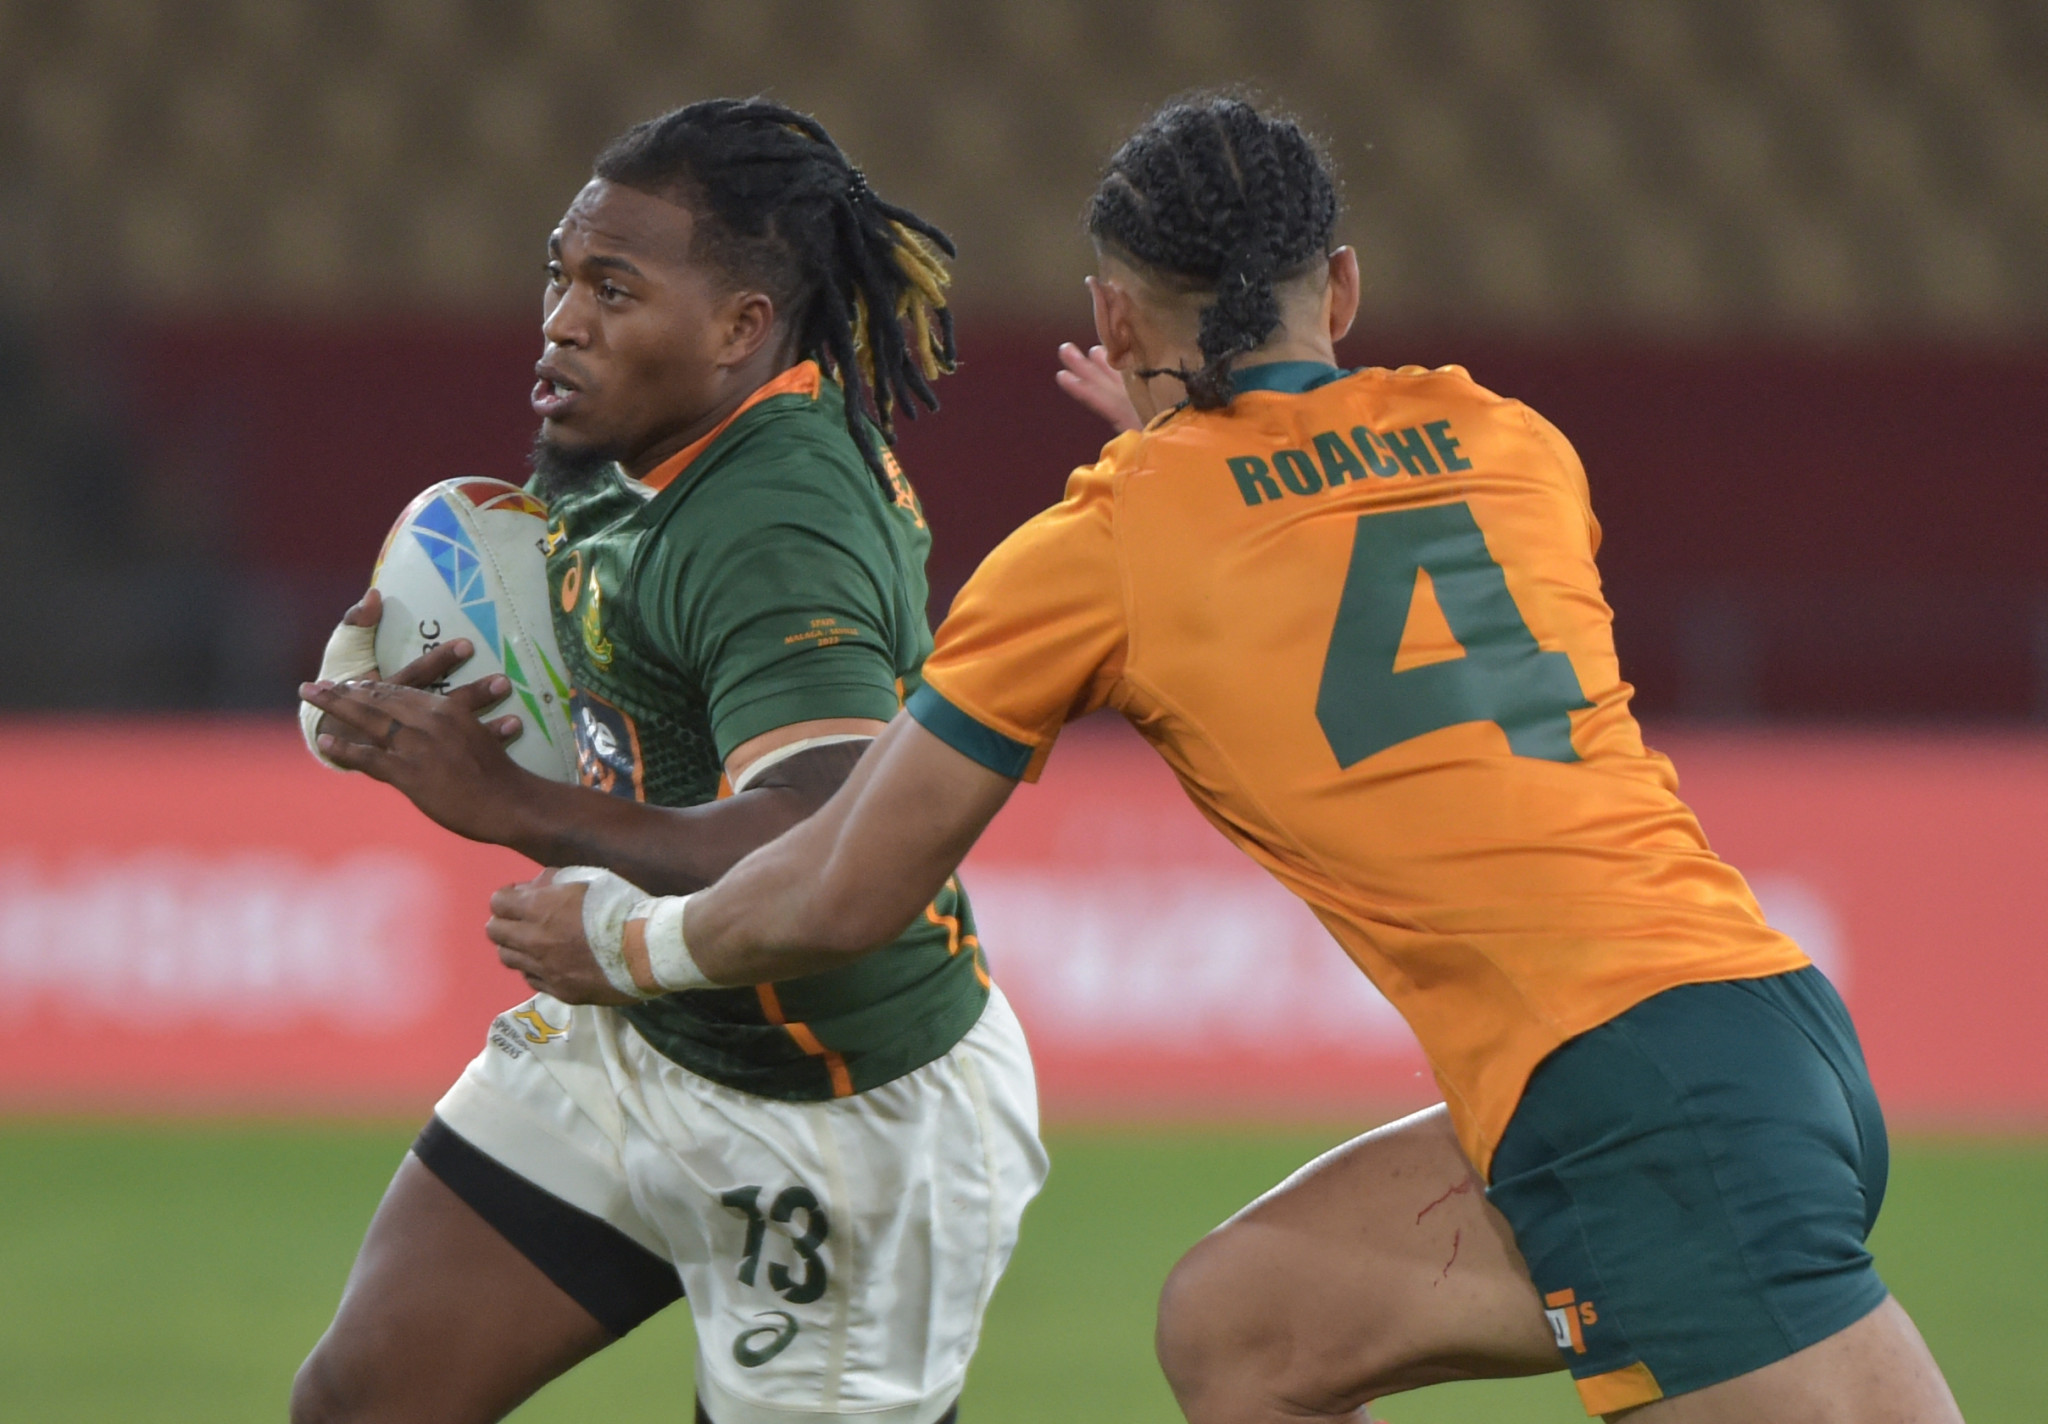 South Africa aiming to recover from Singapore disappointment at Canada World Rugby Sevens Series event